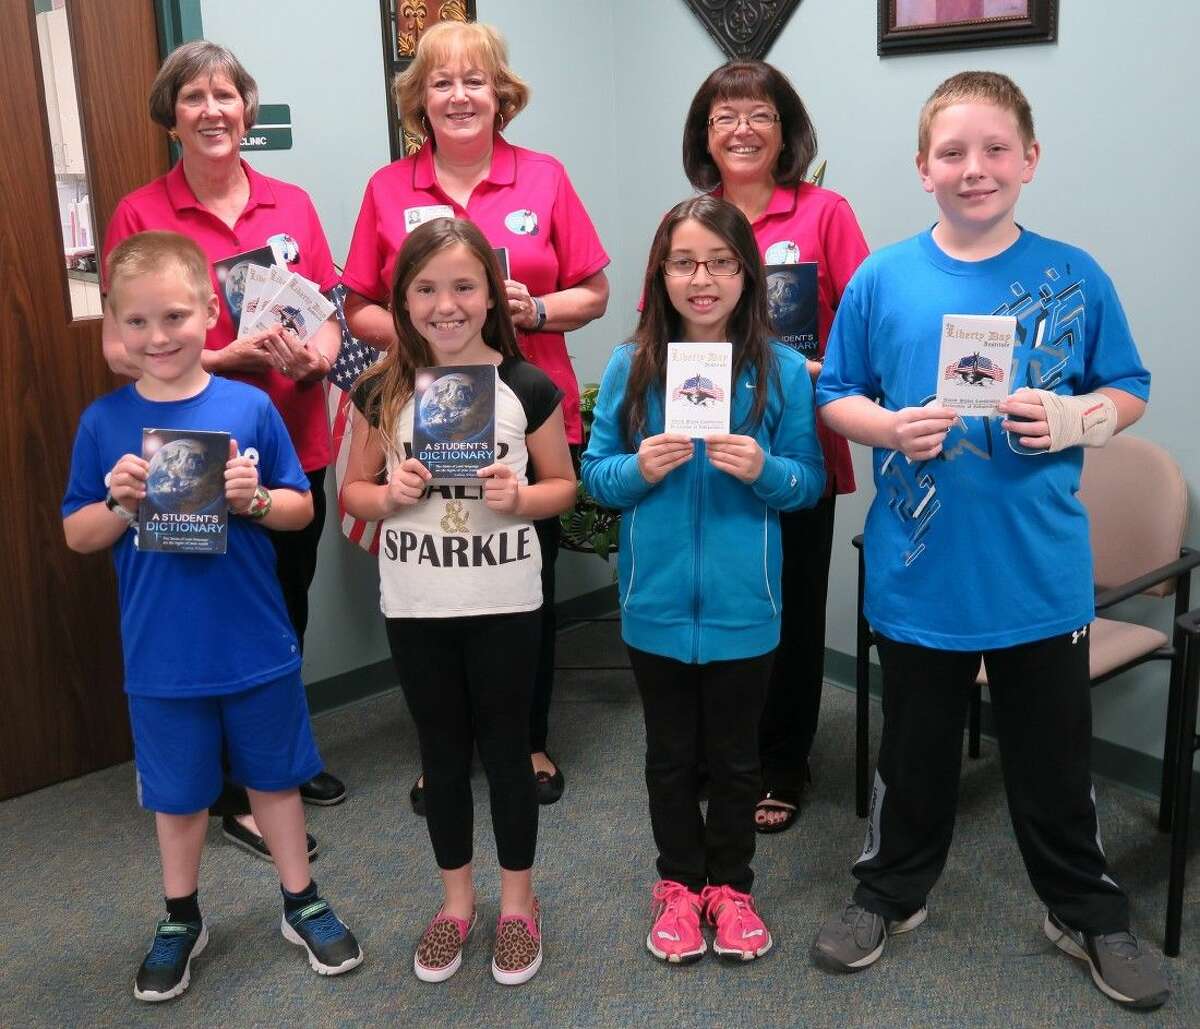 Front row: Dictionaries were presented to Meador Elementary third grade students Colson Solberg and Mallori Mitchell, and Belkys Benitez and Carson Haefner, fifth graders, received Constitution booklets.Back row, Ann Kate, NSRW Media Chairman; Judy Love, NSRW Literacy/Youth Outreach Chairman; and Gail McKinnon, NSRW President.